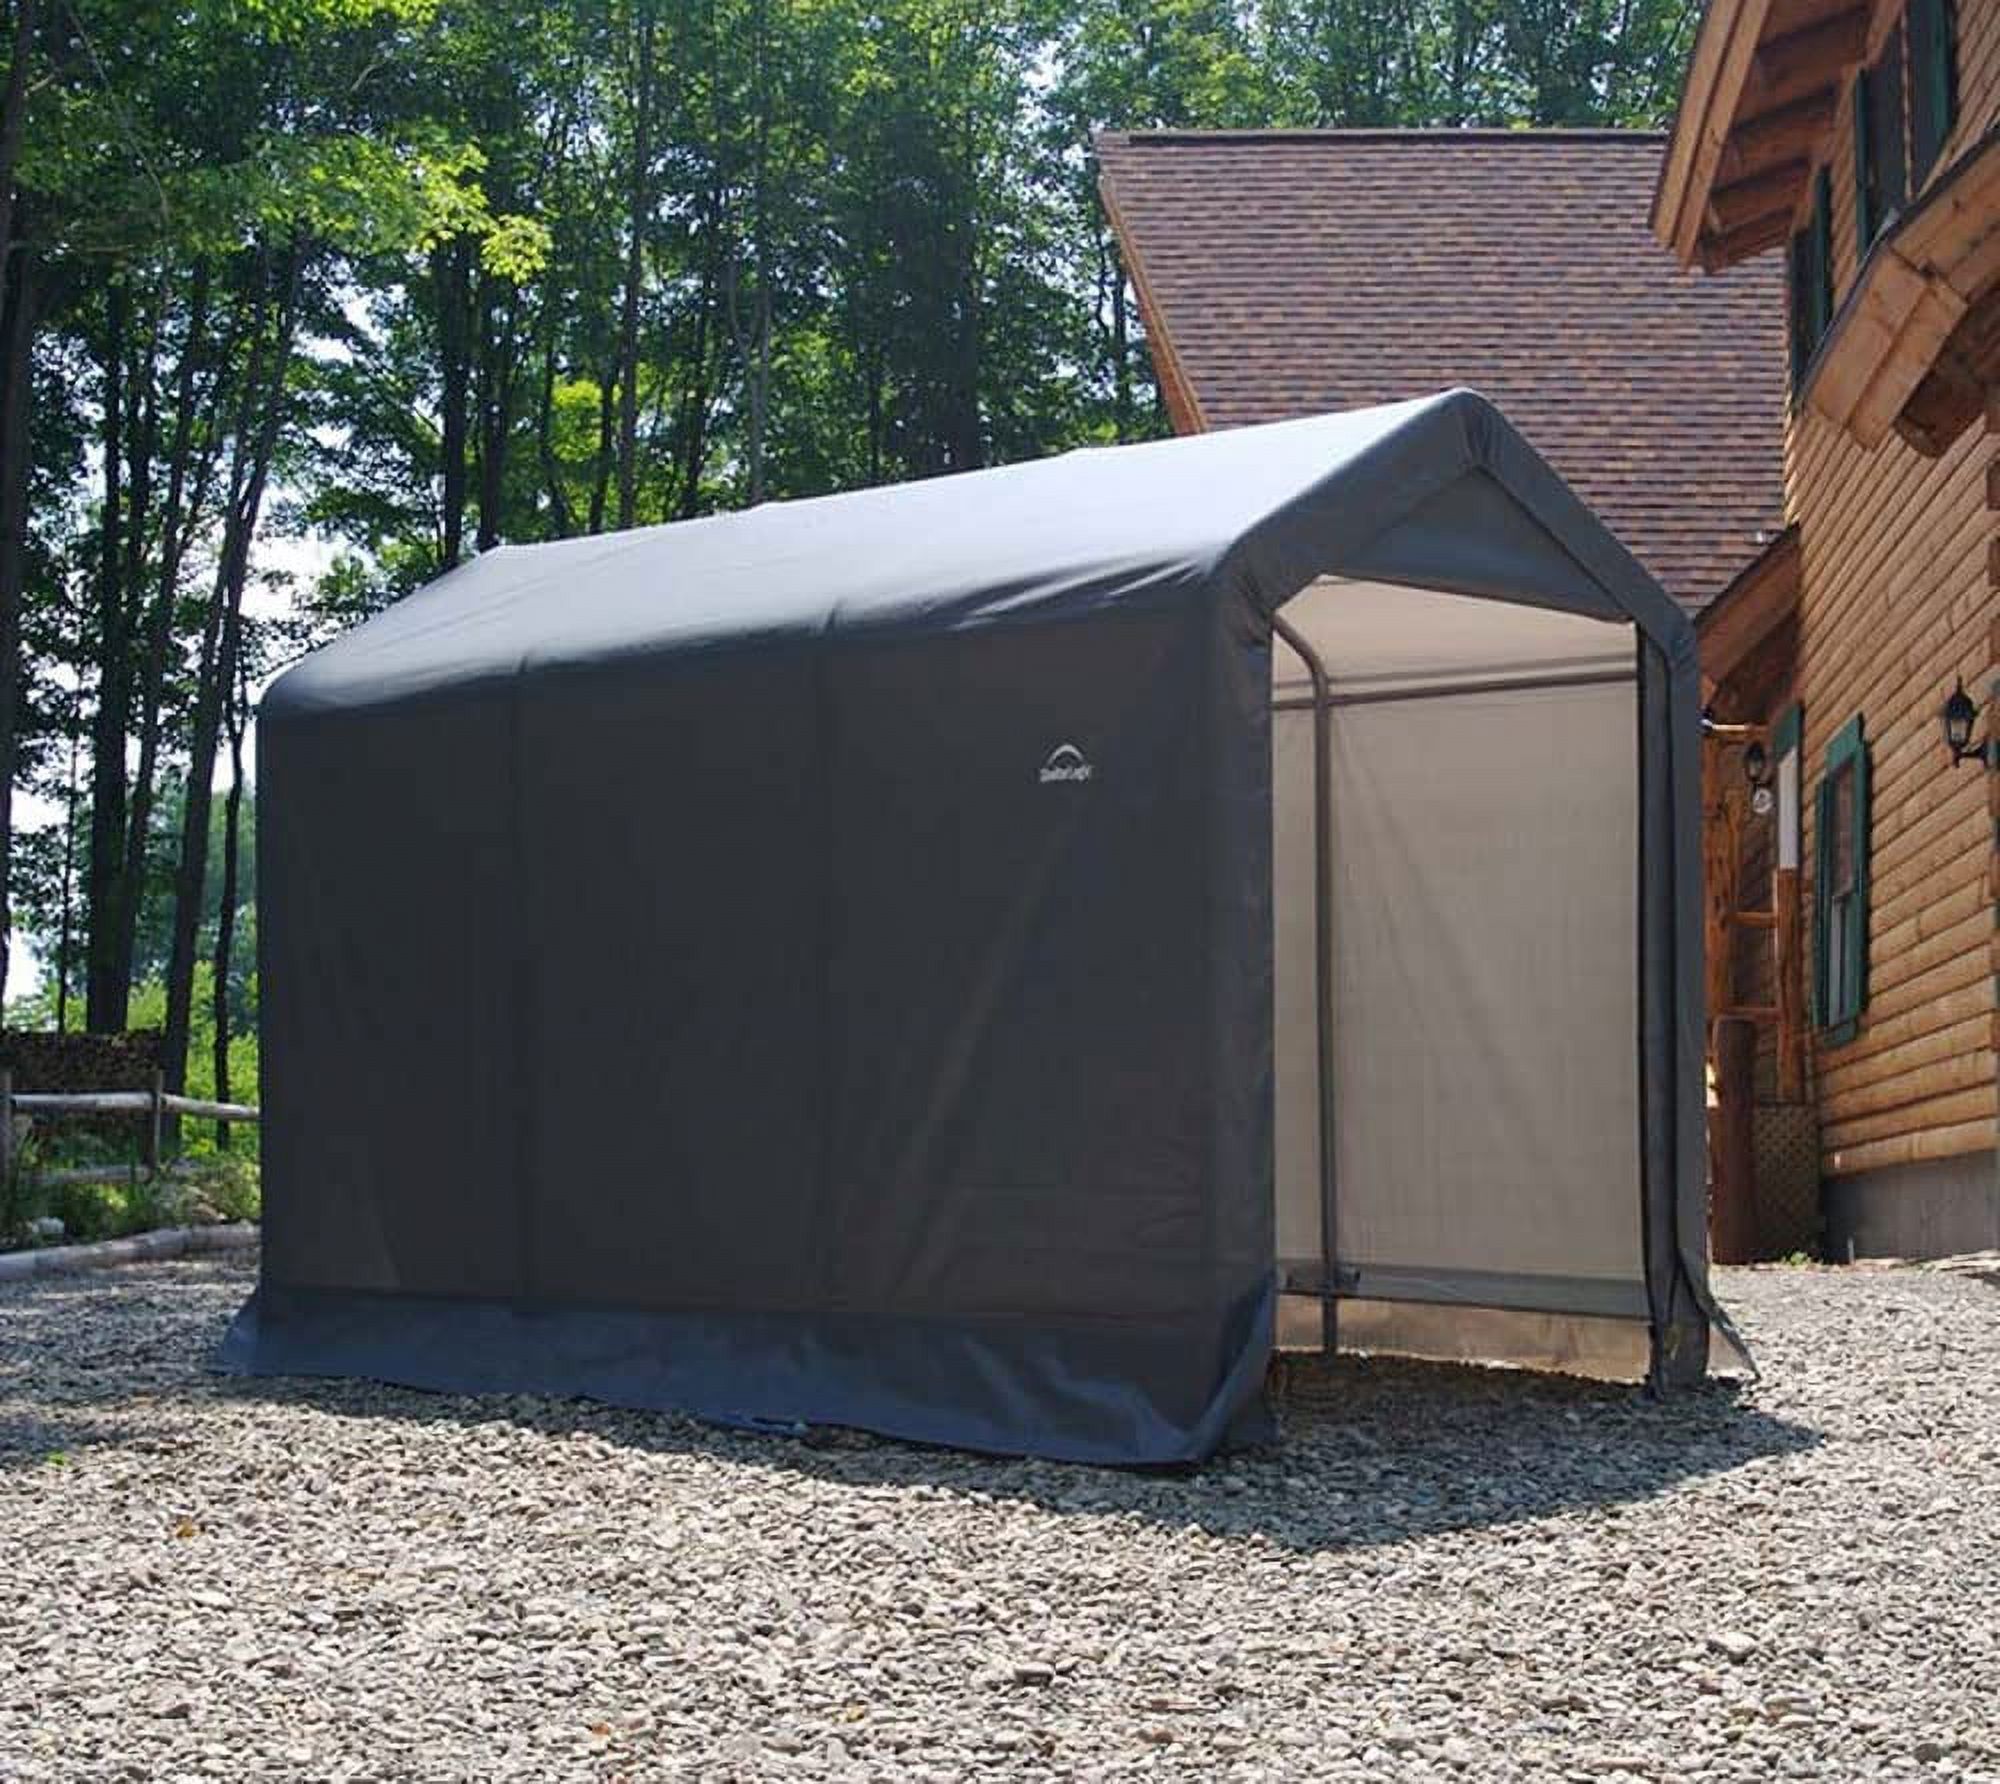 ShelterLogic Shed-In-A-Box Canopy Storage Shed 6W x 10D x 6.5H ft. 